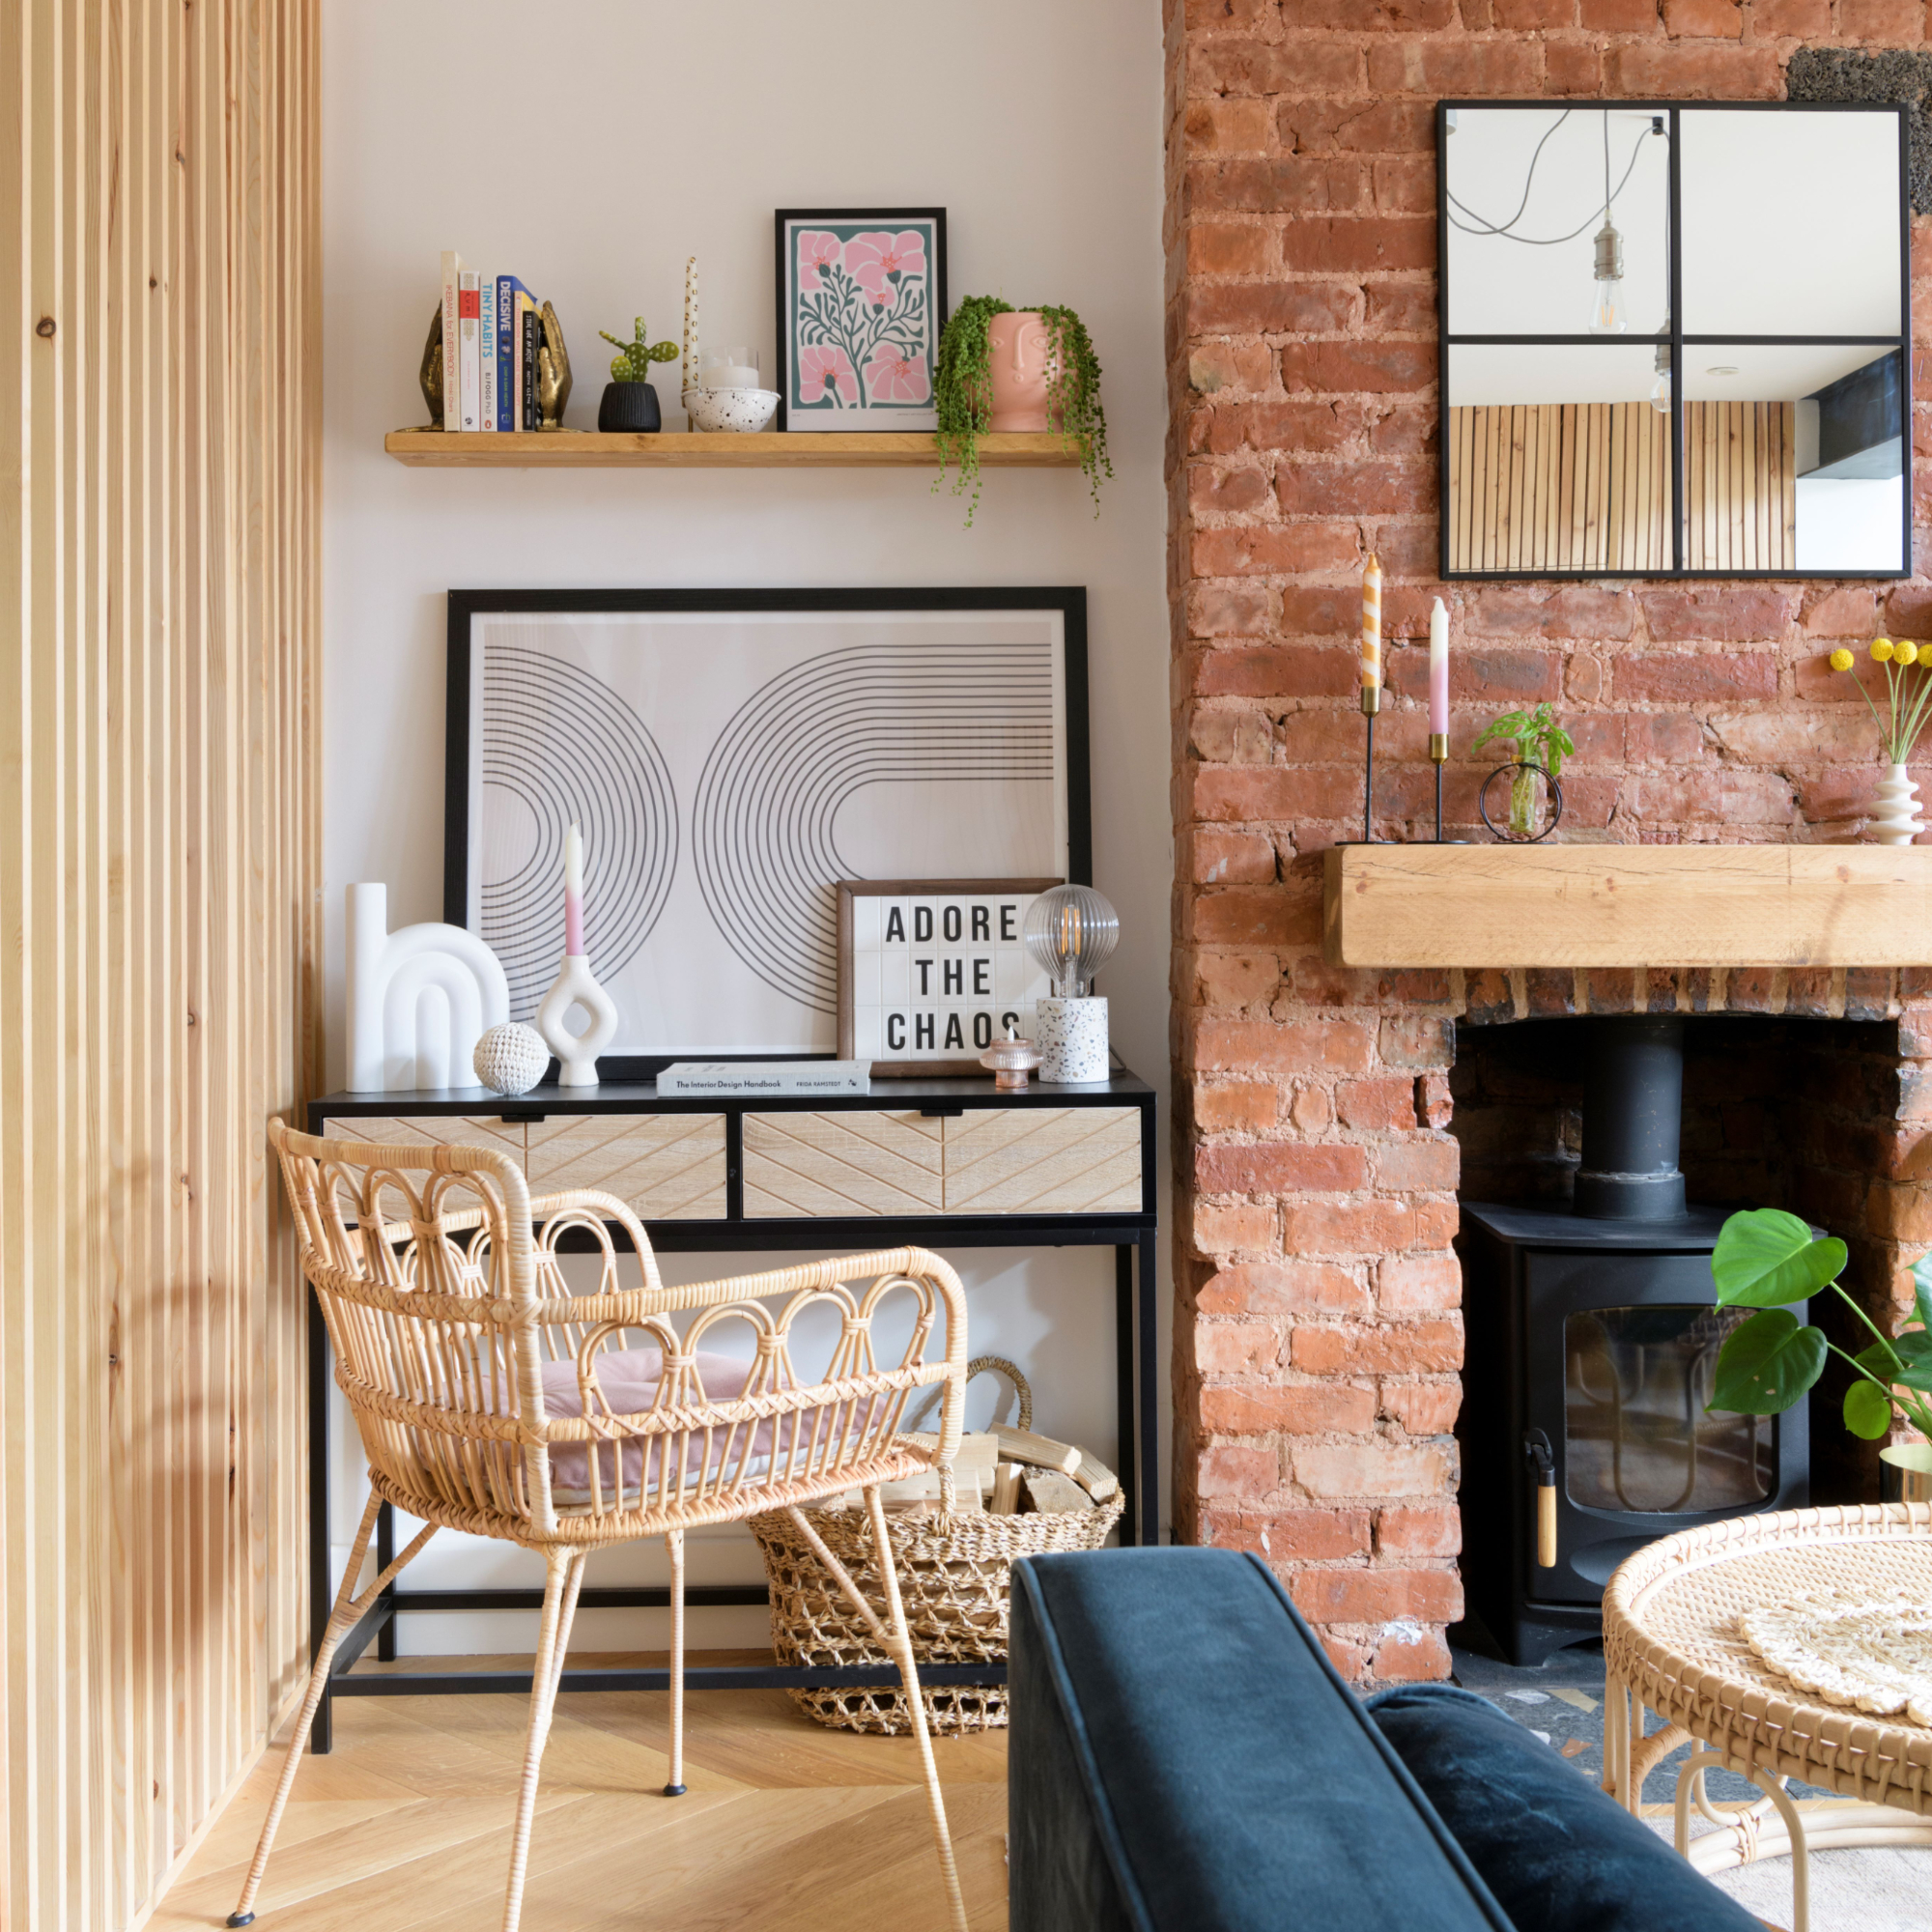 Living room with exposed brick feature wall and woodburner, open shelving, console table and chair